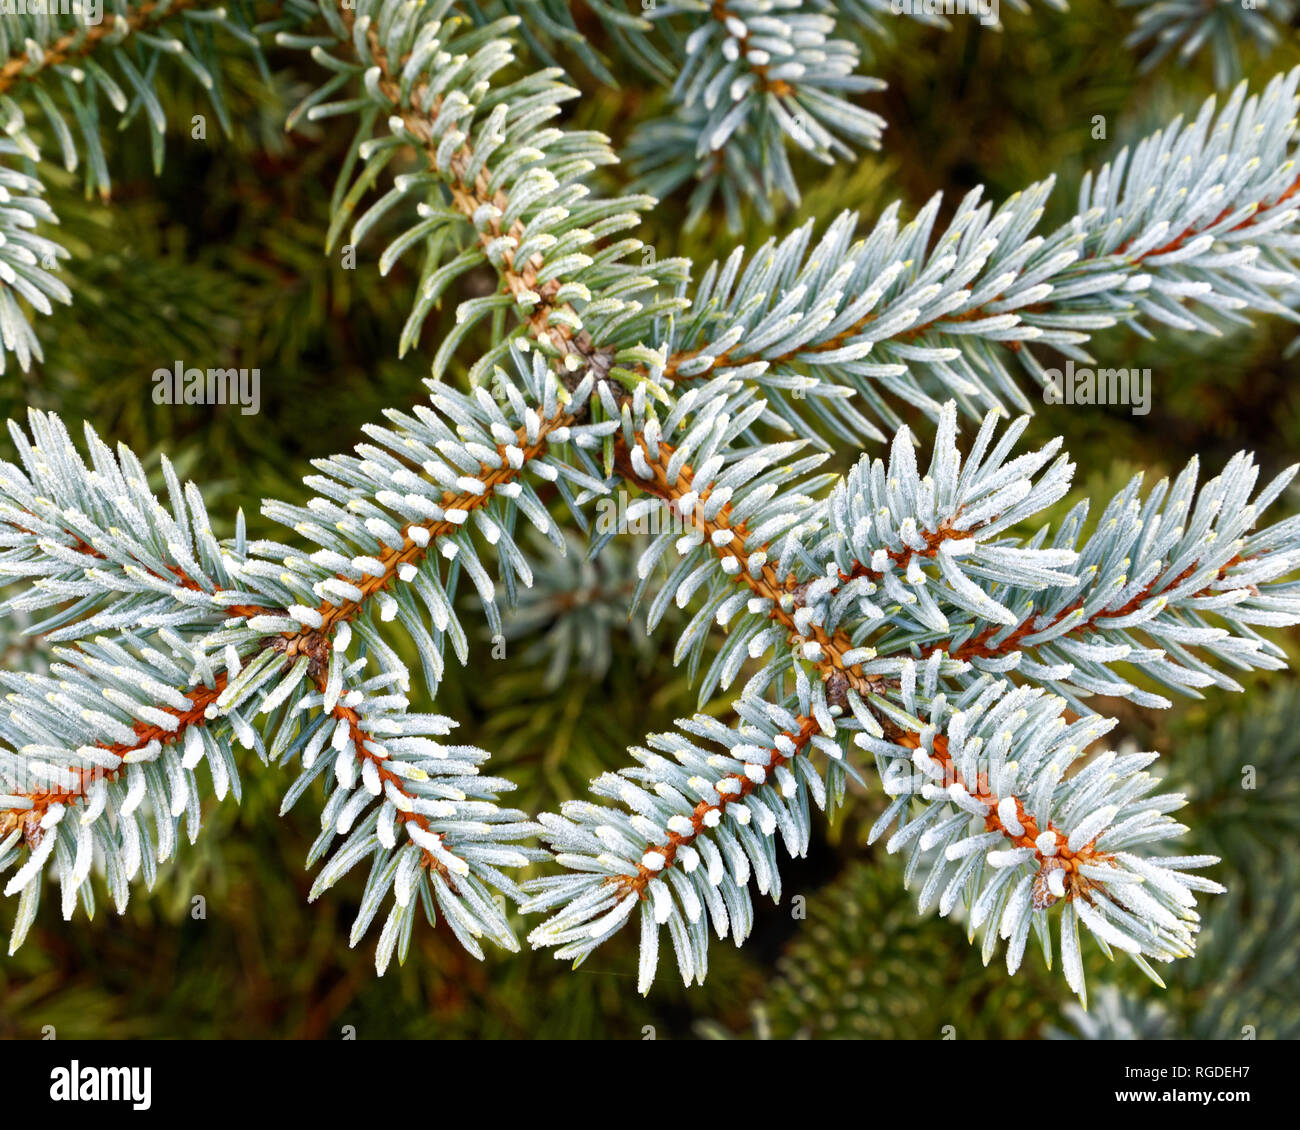 43,467.03845 Frosty, lightly frosted, green needles & branches on winter spruce tree (Picea species, Pinaceae), green background Stock Photo